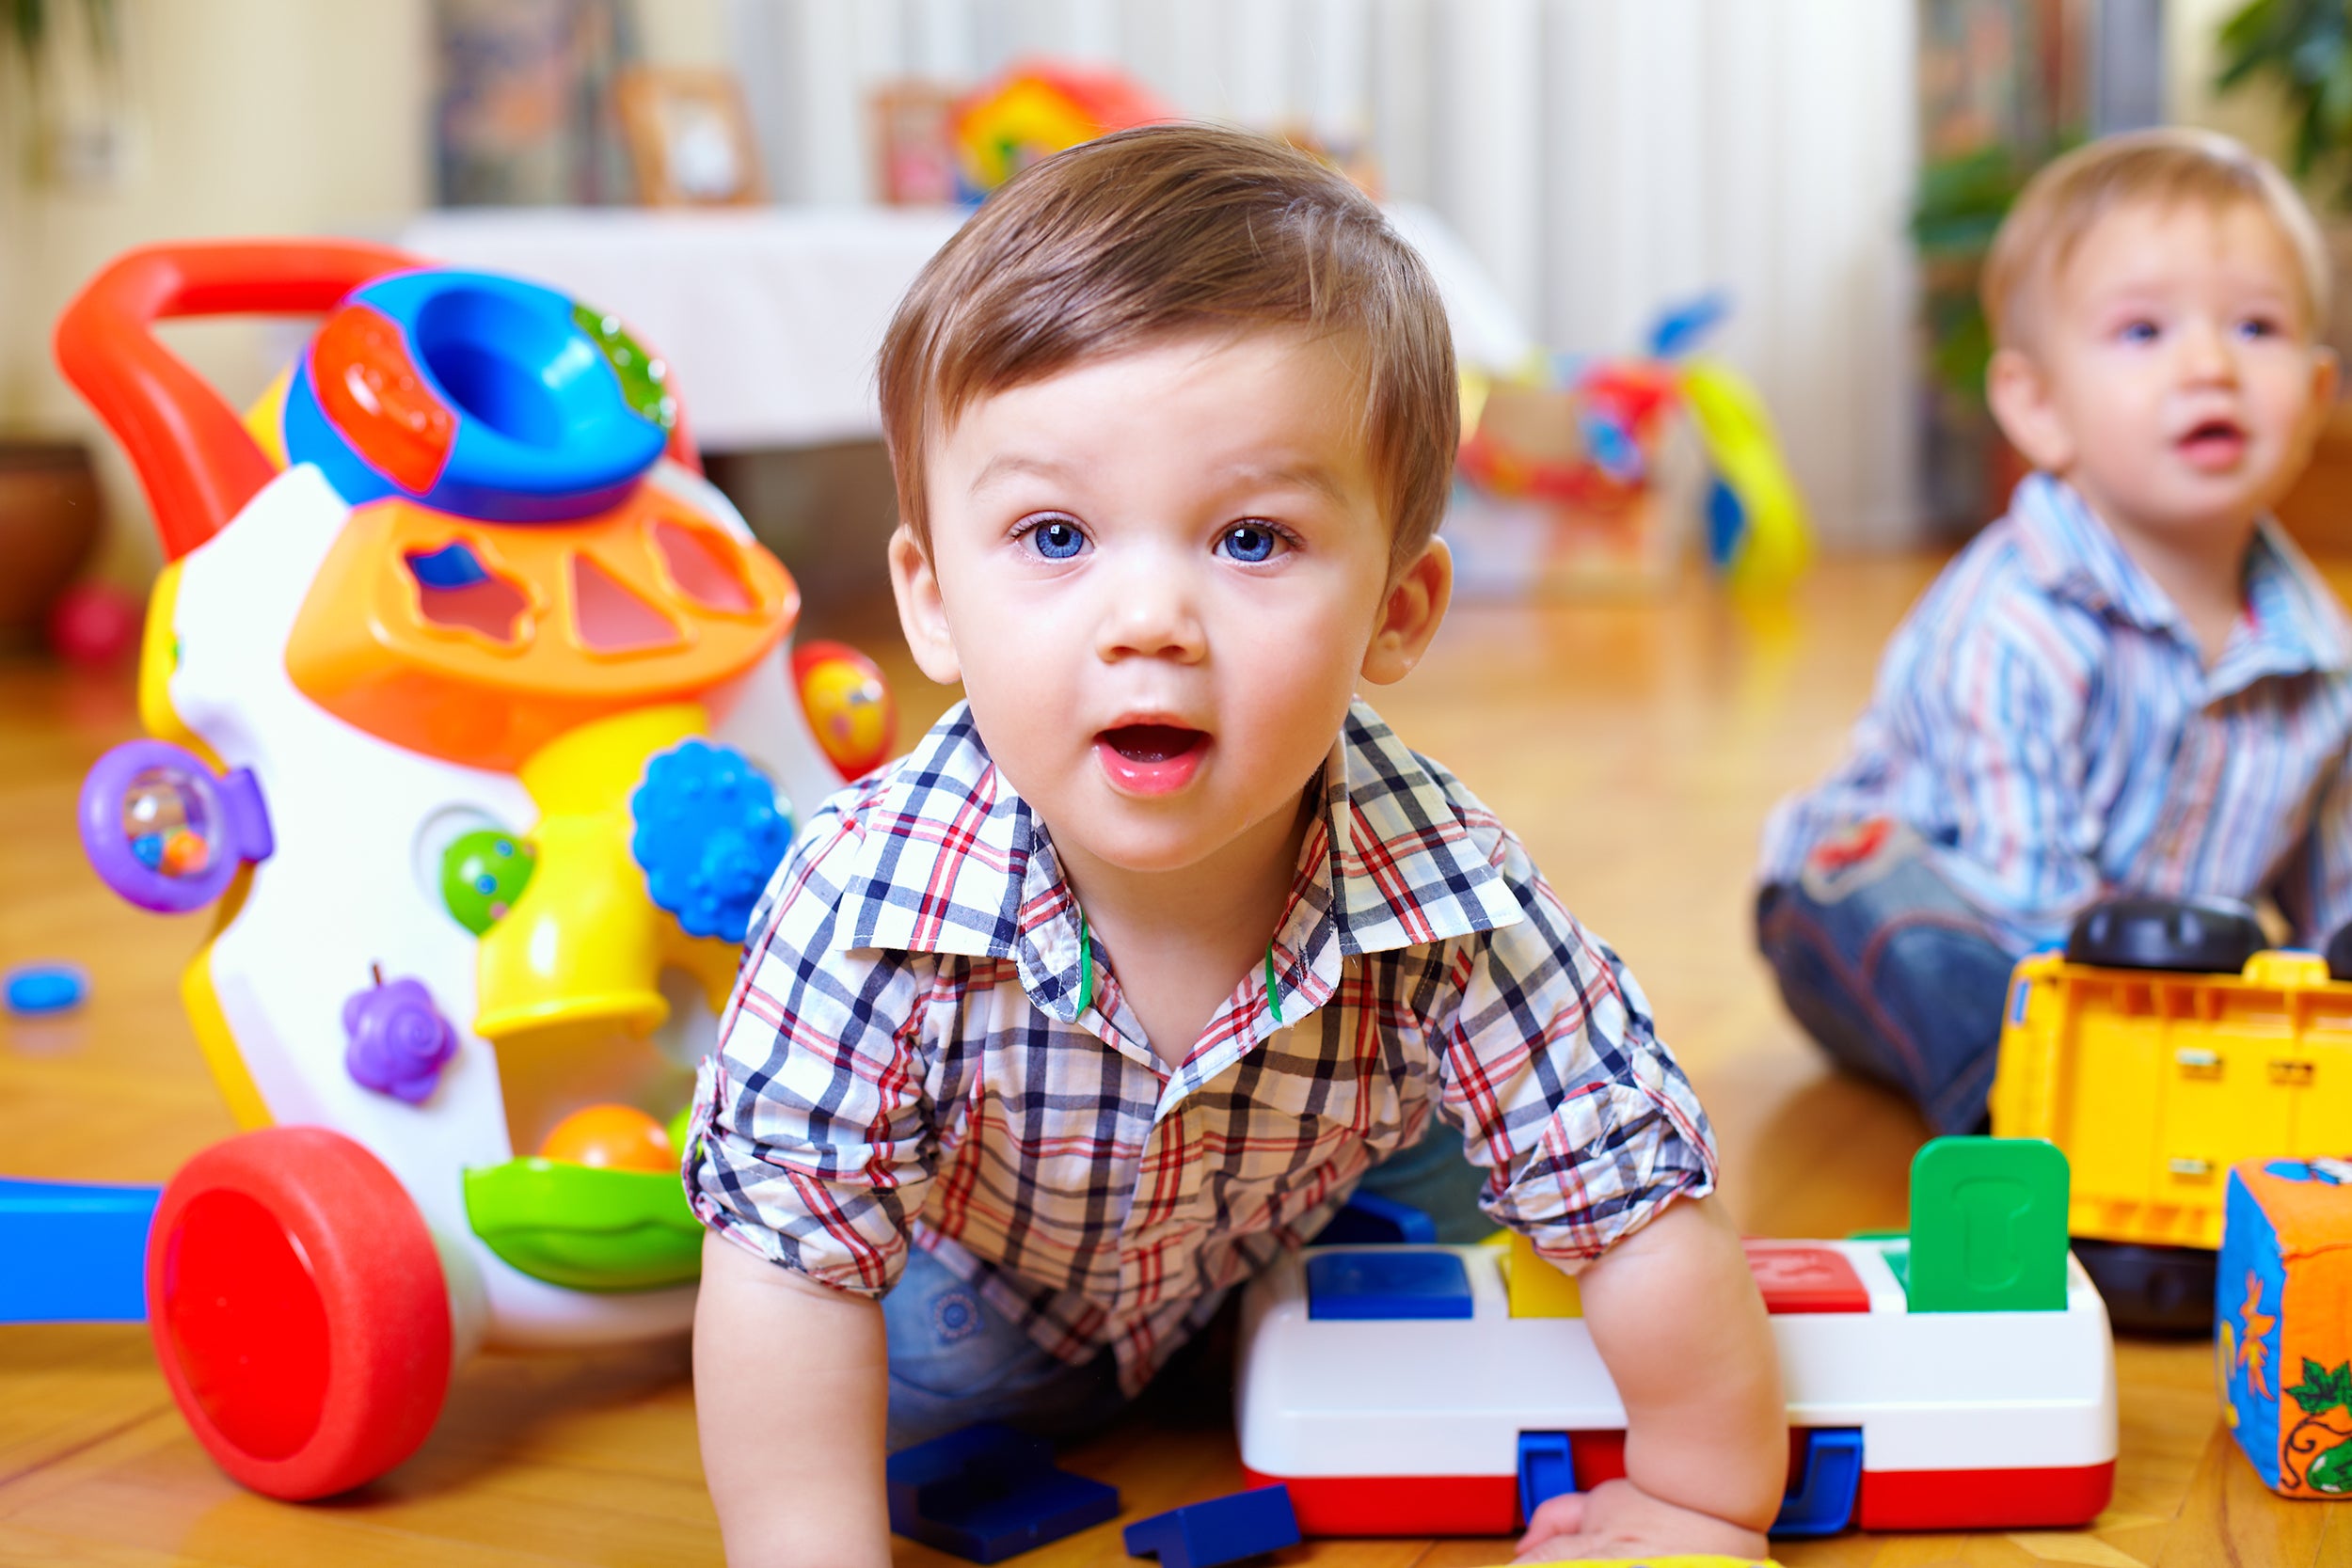 Non-Toxic Paints for Your Nursery or Kids' Rooms - Center for Environmental  Health